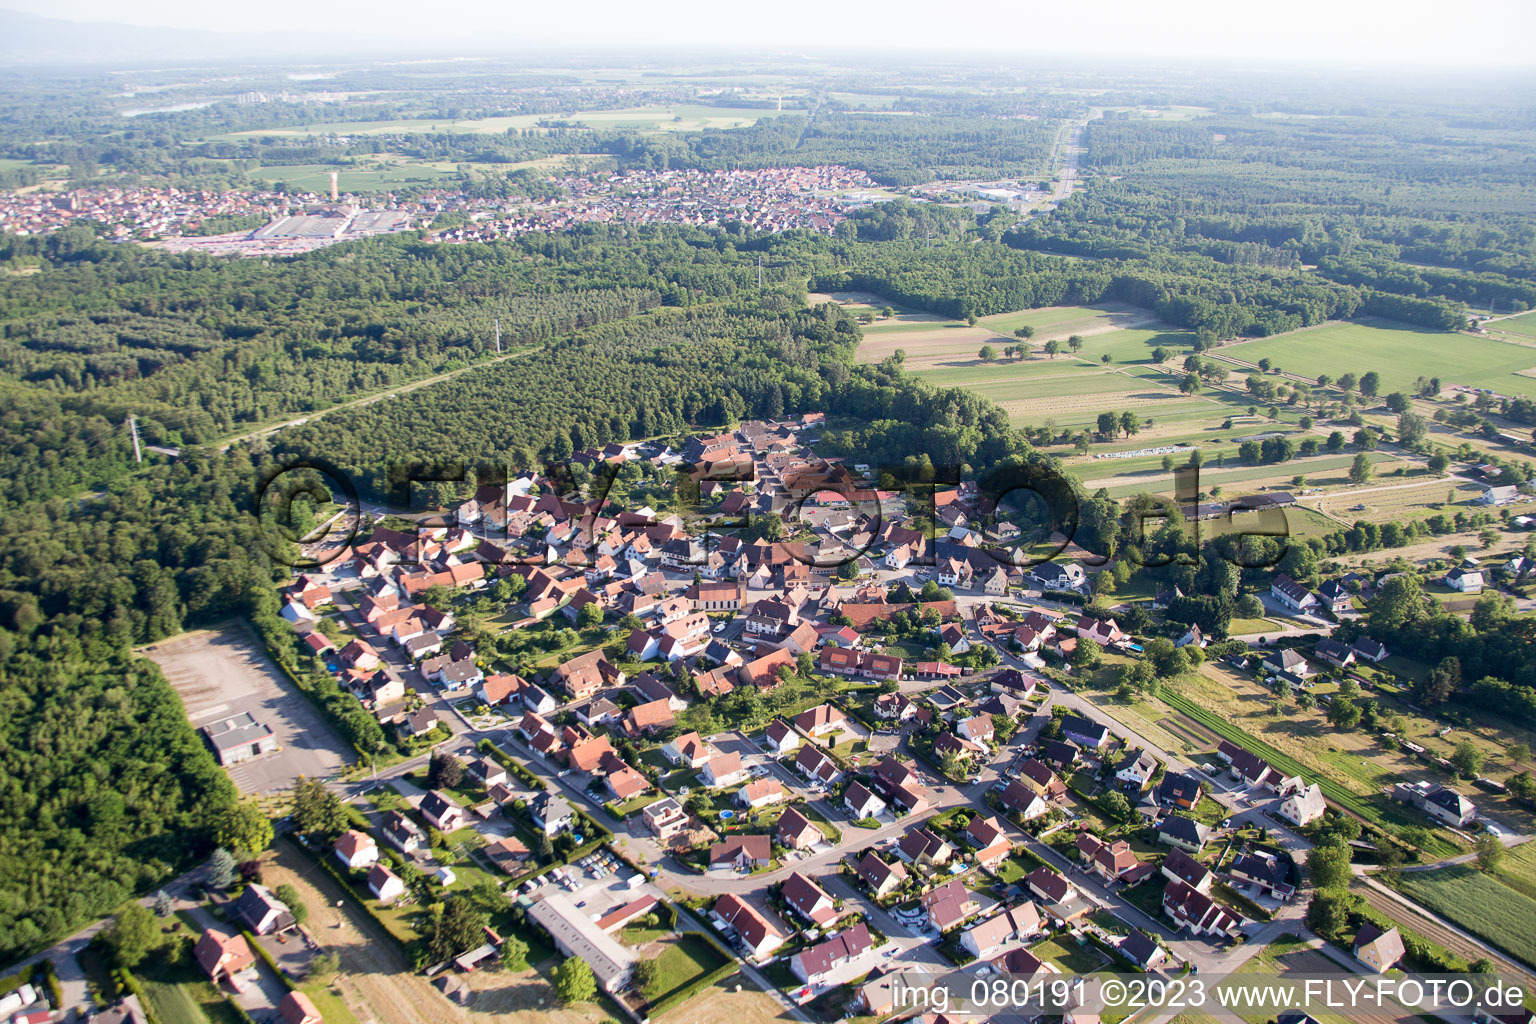 Schaffhouse-près-Seltz in the state Bas-Rhin, France from a drone